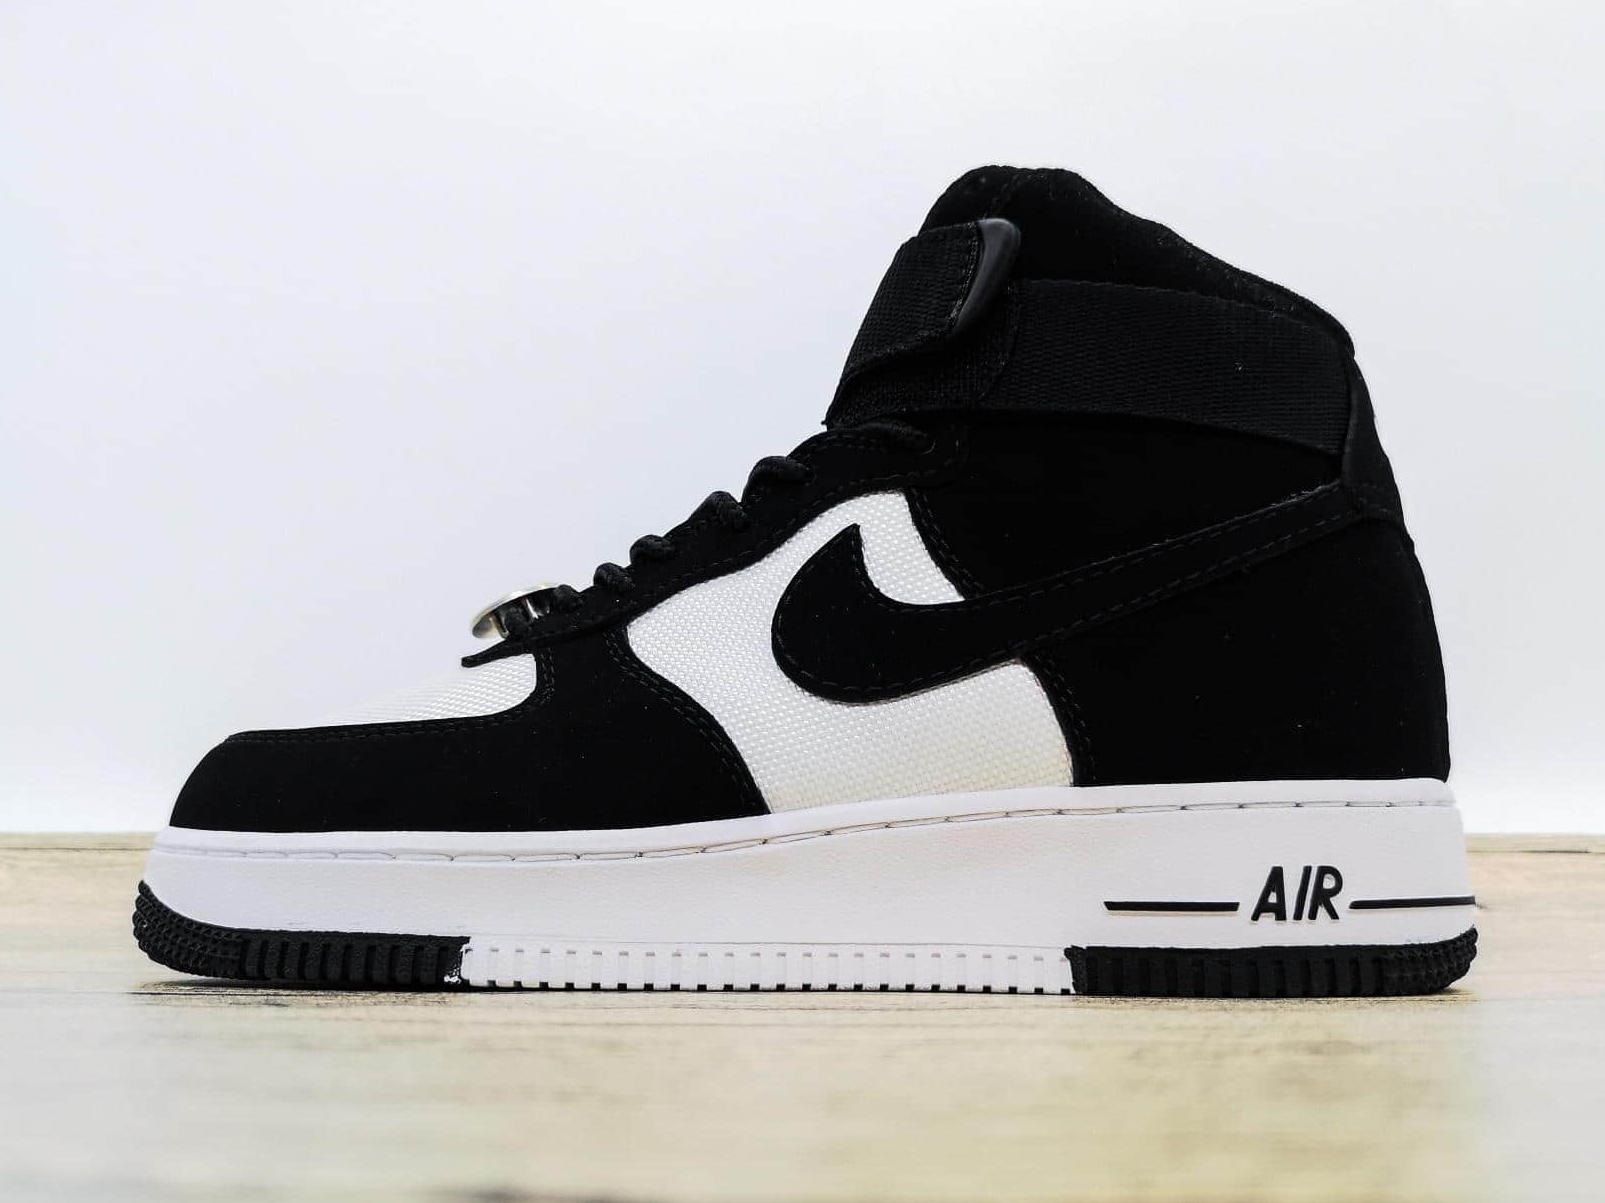 Nike Air Force 1 High 07 LV8 Have a Nike Day Black White CI2306 302 - Shop Now for Ultimate Style and Comfort